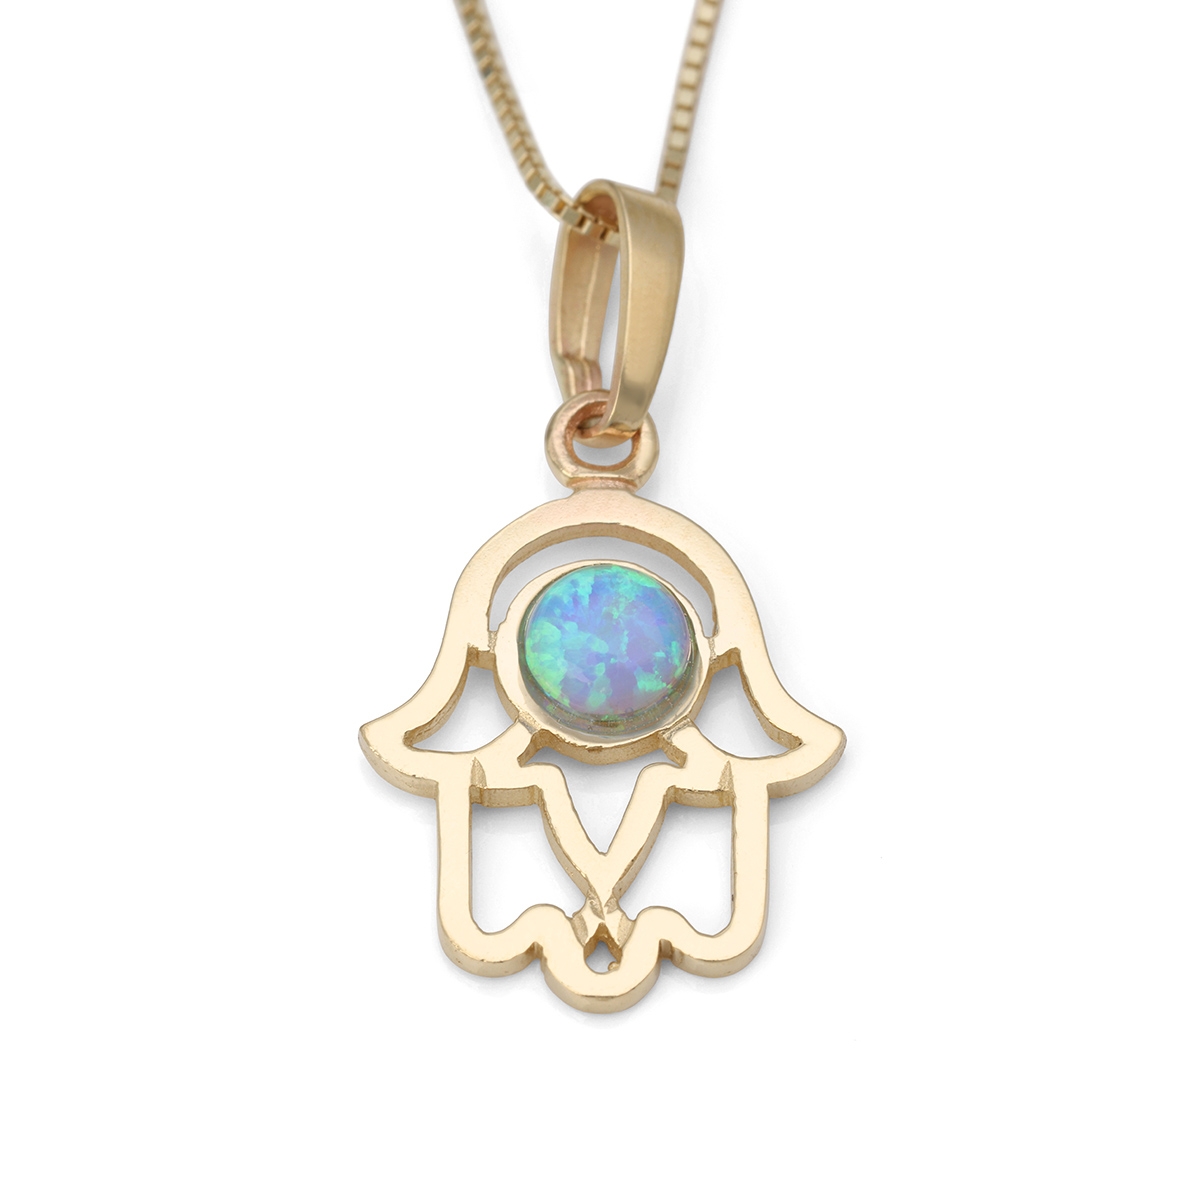 14K Gold and Opal Hamsa Pendant Necklace - 1